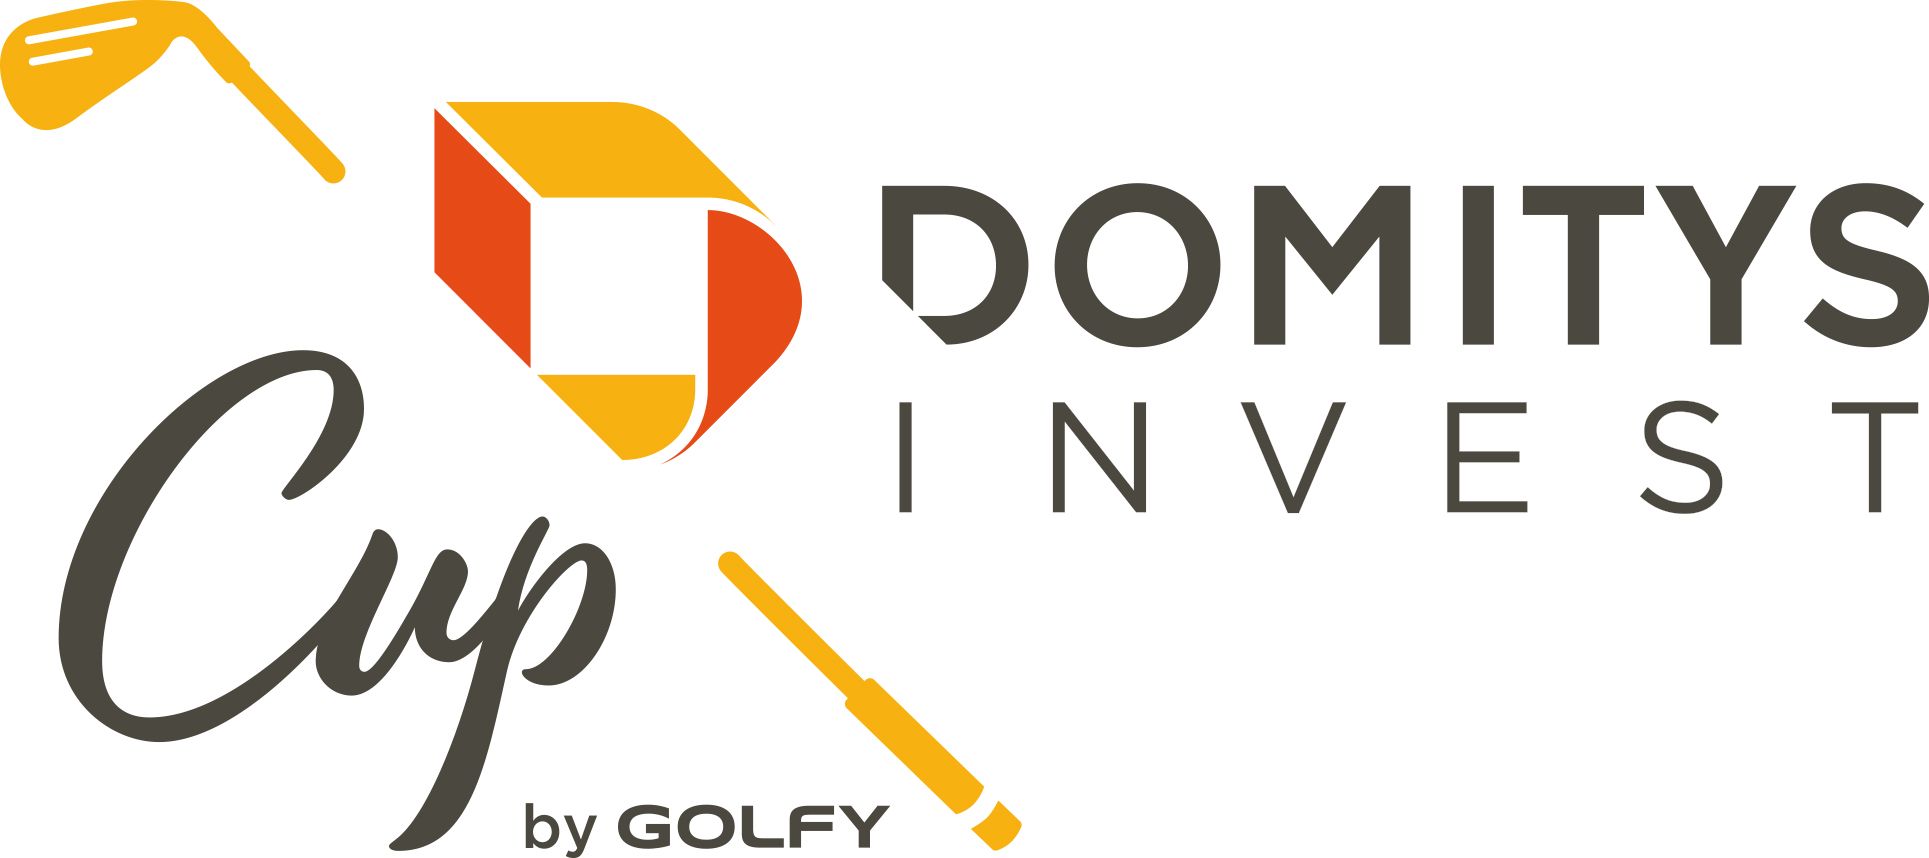 Domitys Invest Cup by Golfy - Royal Keerbergen Golf Club